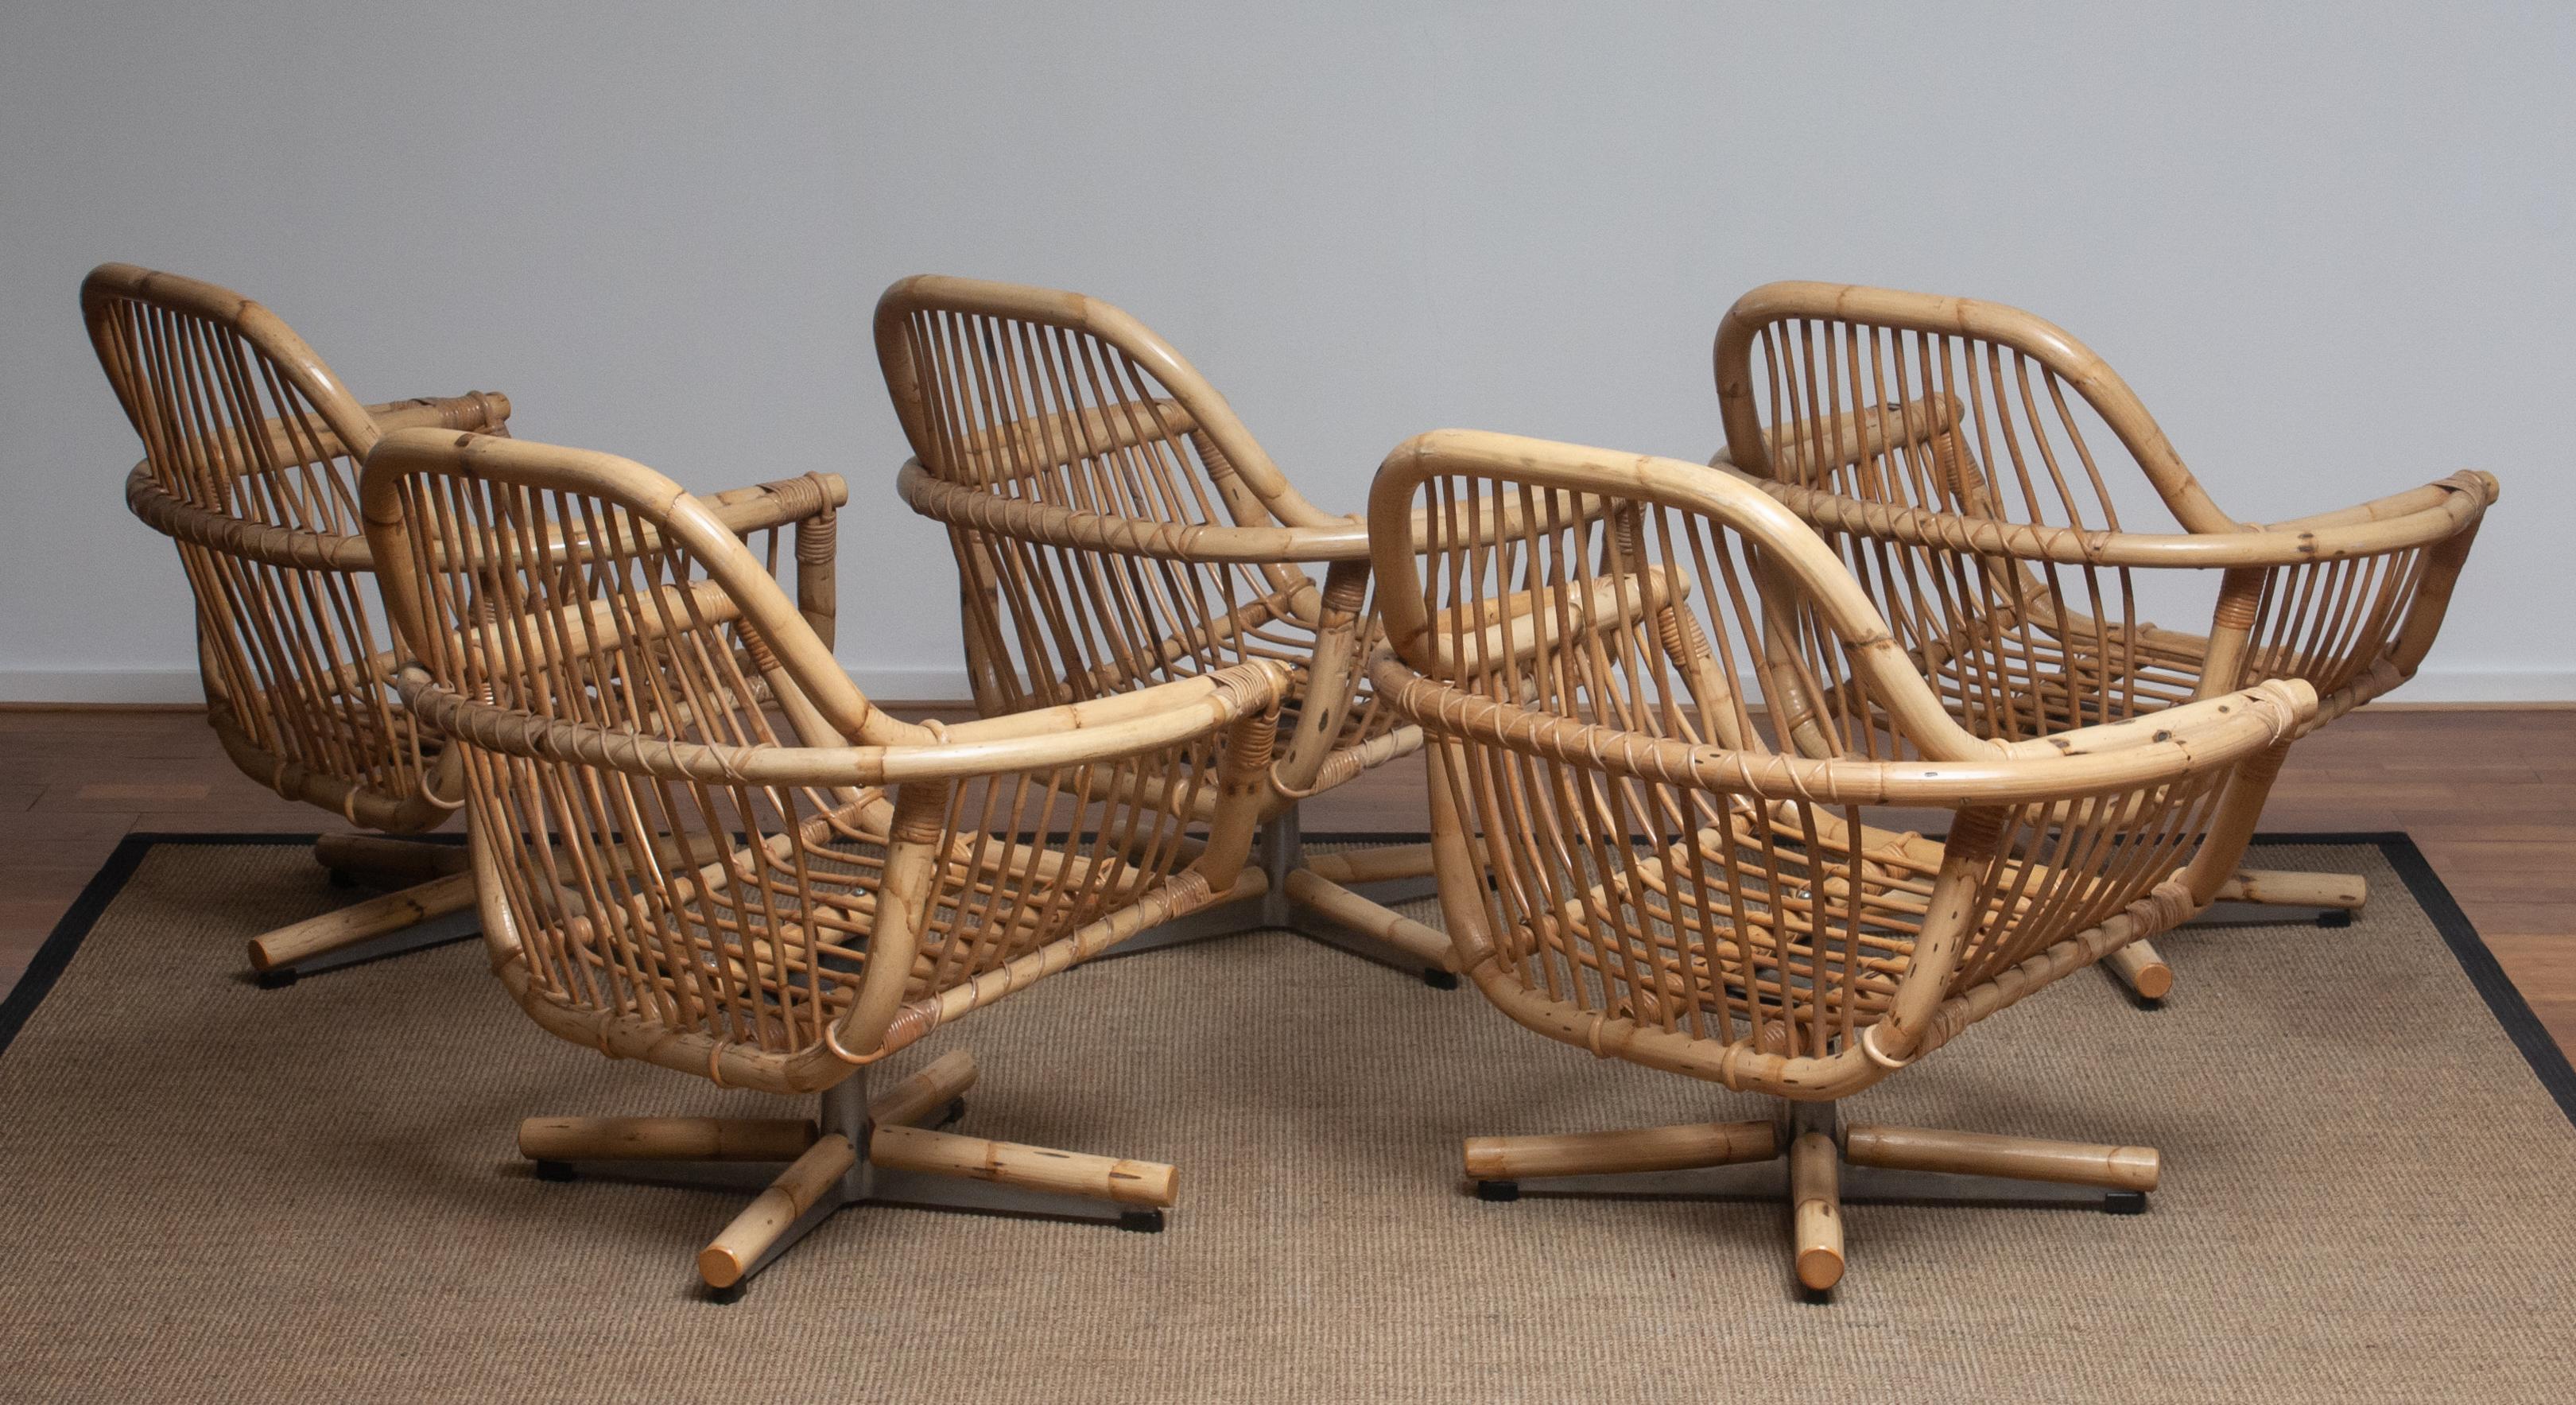 1960s Rattan Garden Set / Lounge Set Consist Five Swivel Chairs and Coffee Table 8